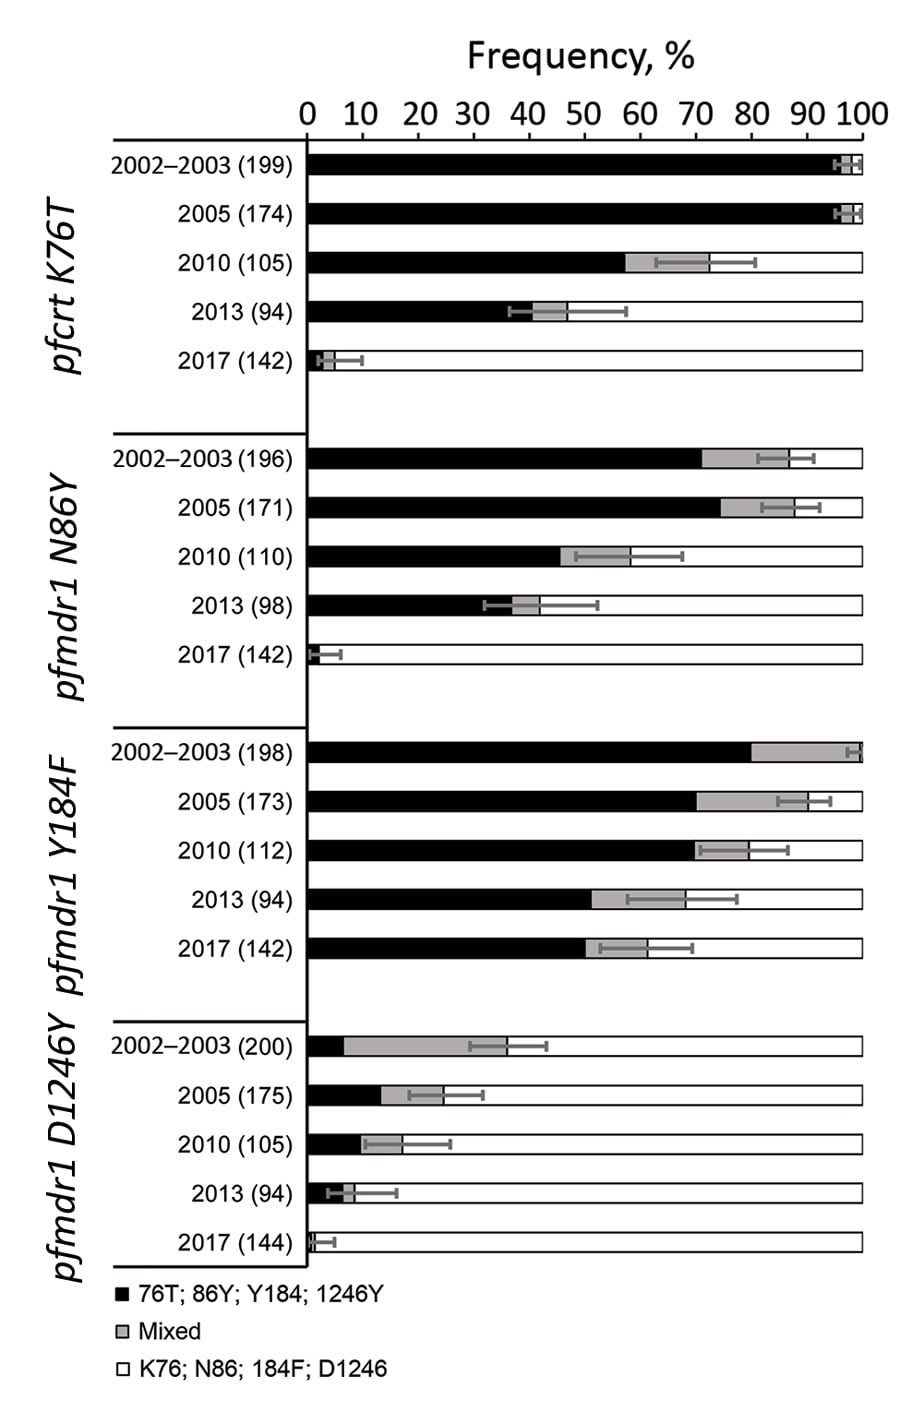 Frequency of polymorphisms associated with amodiaquine resistance in Plasmodium falciparum infections in Zanzibar, 2002–2017. Black bars indicate resistance alleles, gray bars indicate mixed infections, and white bars indicate wild-type alleles. Error bars indicate 95% CIs of proportions of infections harboring resistance alleles (either alone or mixed infections). Values in parentheses are the total number of genotyped samples shown next to the study year. Trend analysis: p&lt;0.001 for pfcrt 7